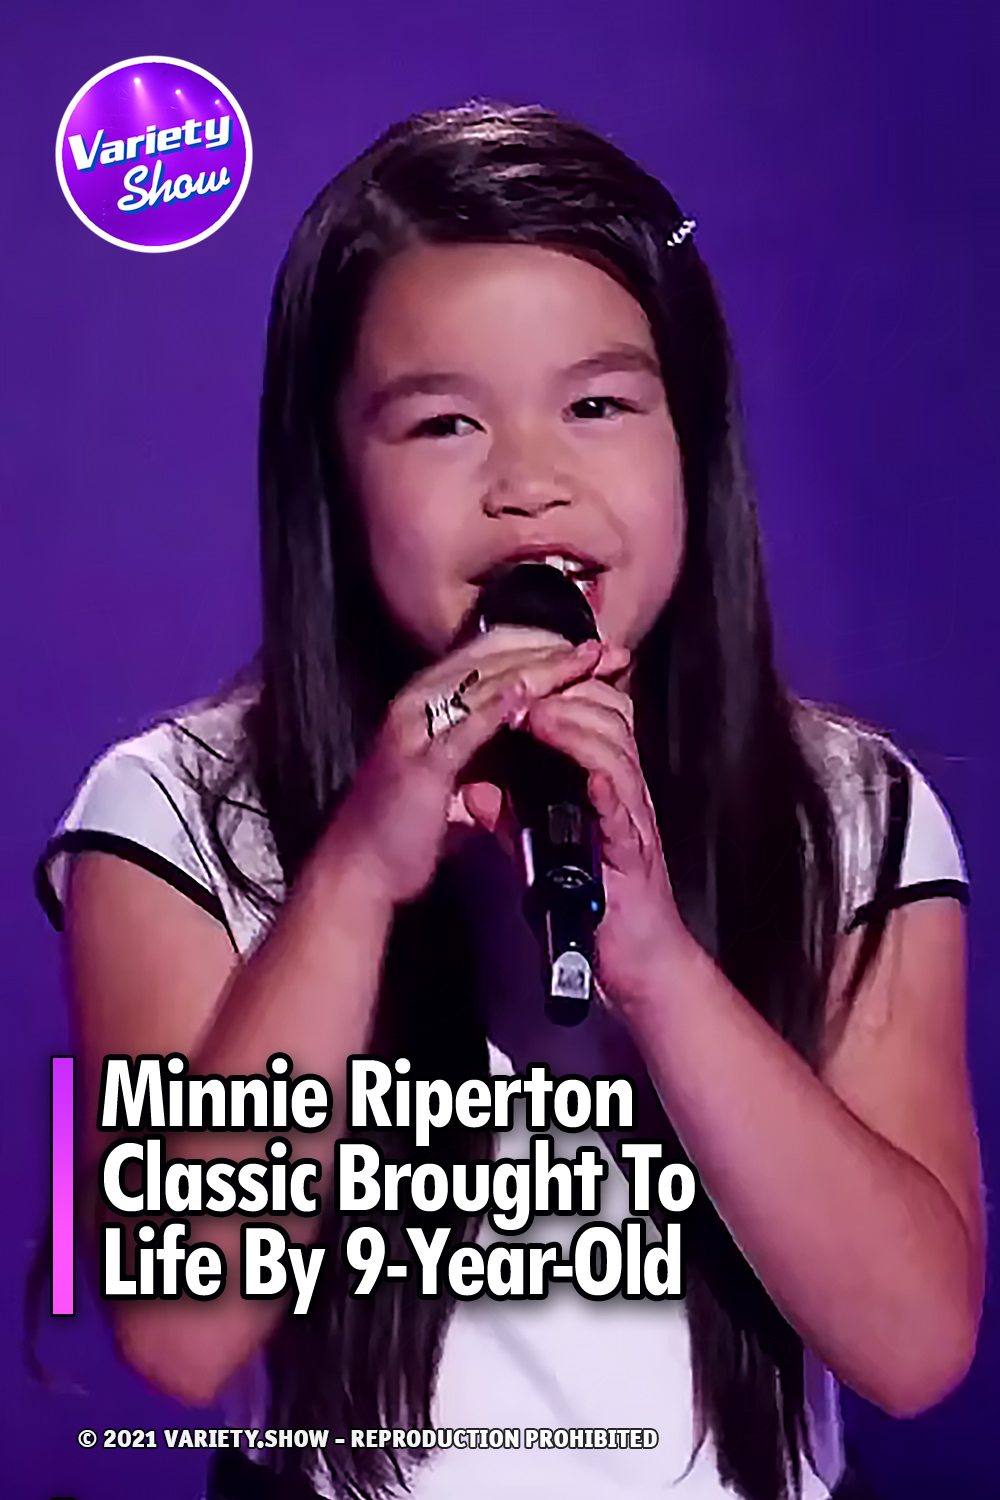 Minnie Riperton Classic Brought To Life By 9-Year-Old